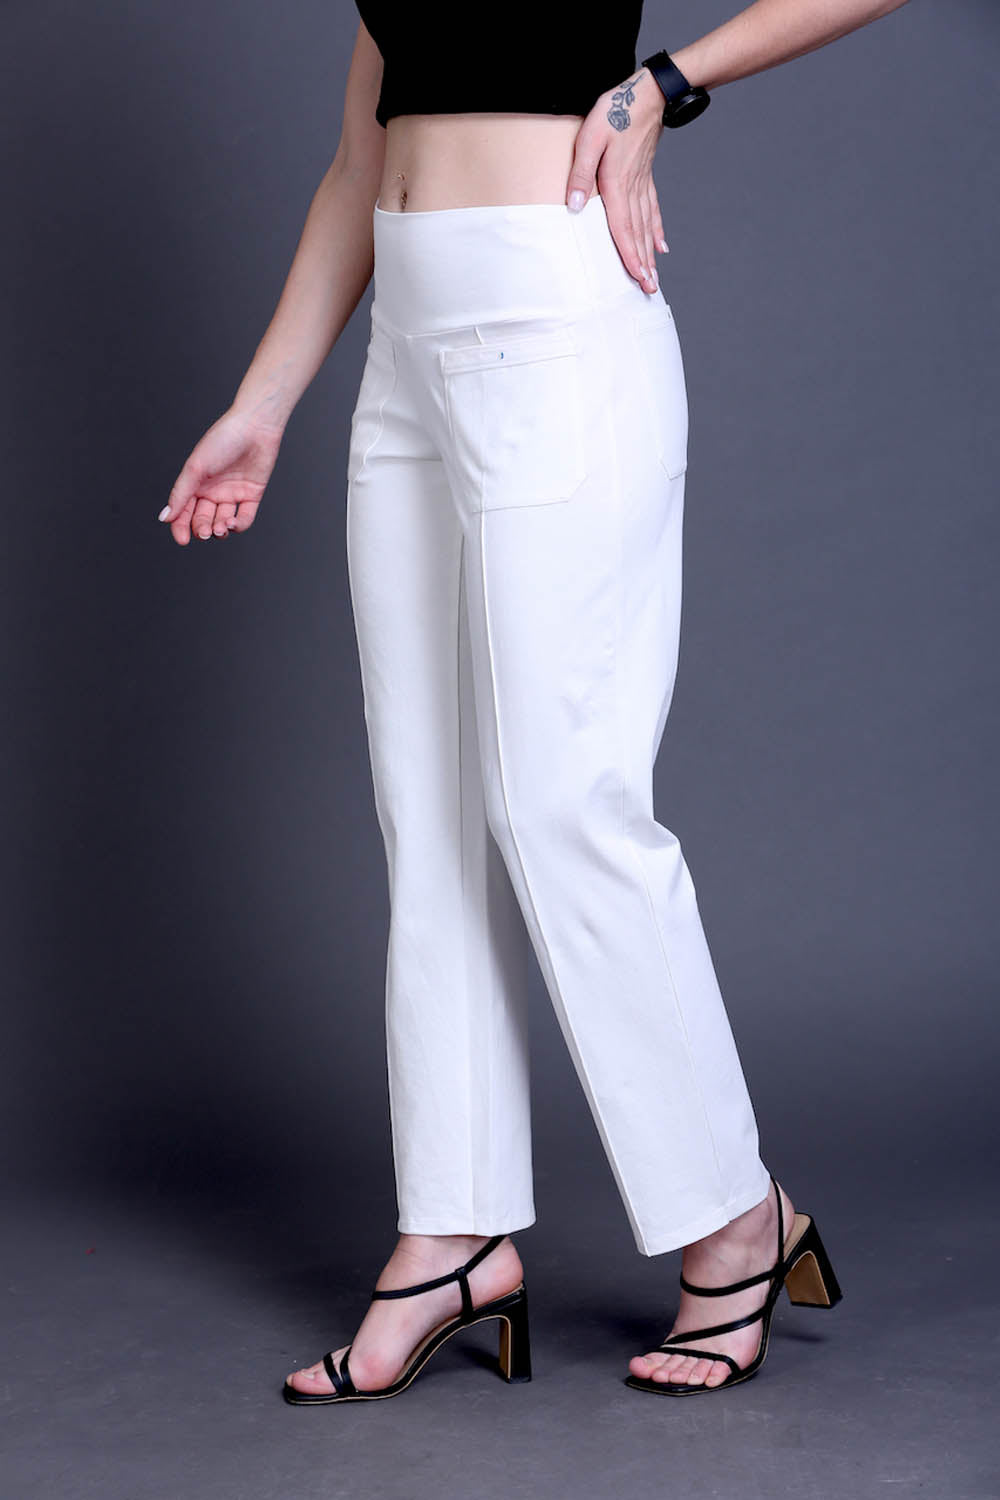 White Cotton and Linen Dress Pant - Custom Fit Tailored Clothing